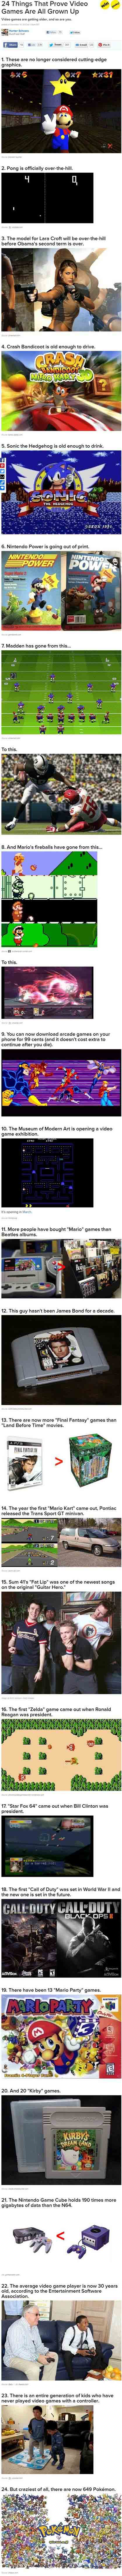 24 Things That Prove Video Games Are All Grown Up